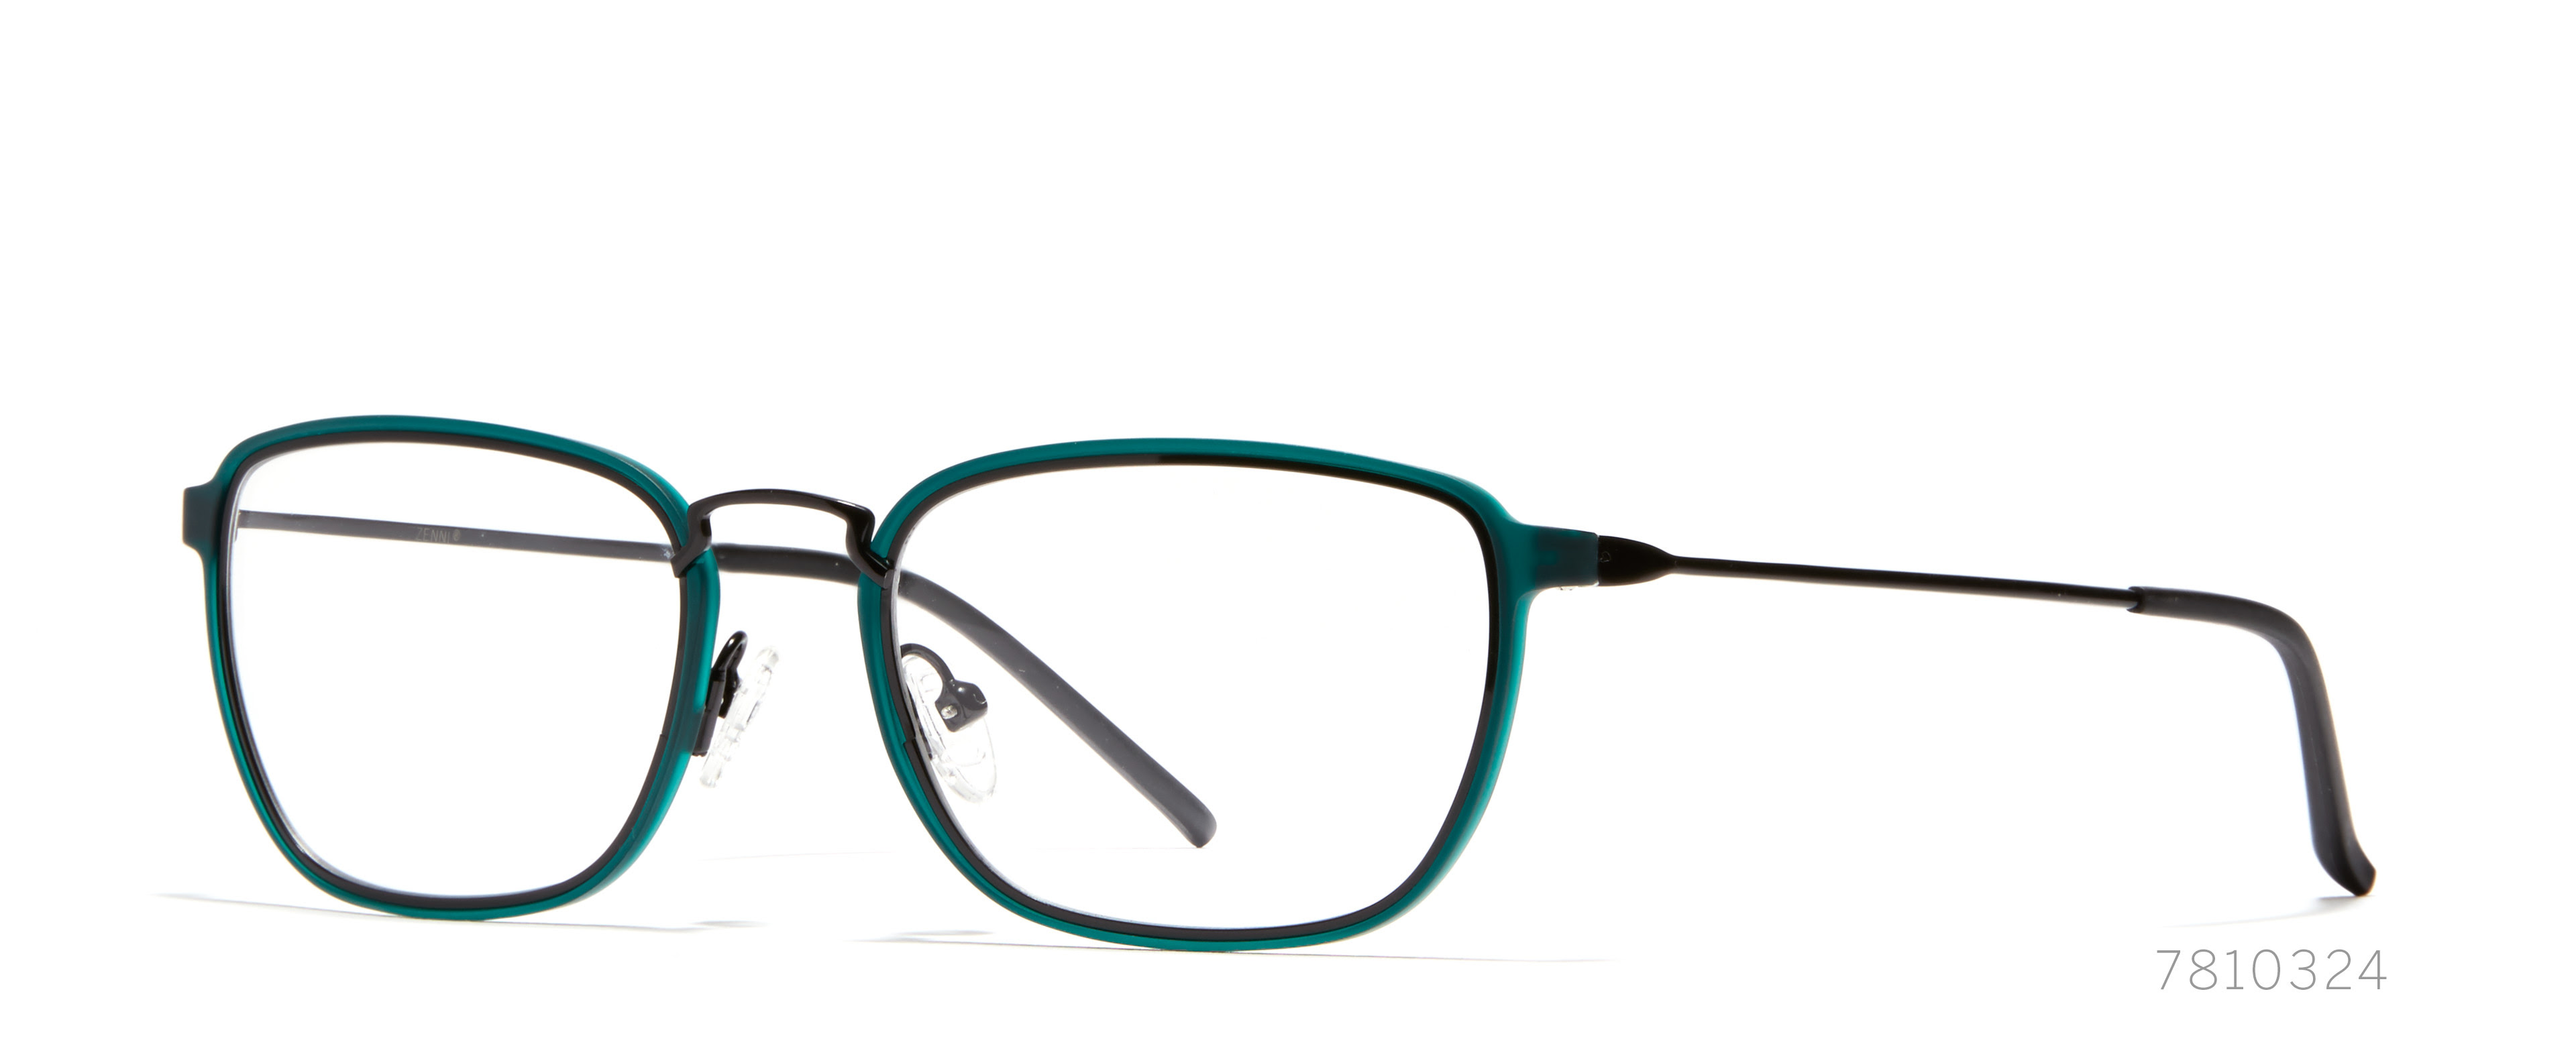 Finding The Best Glasses For Your Oval Face Zenni Optical